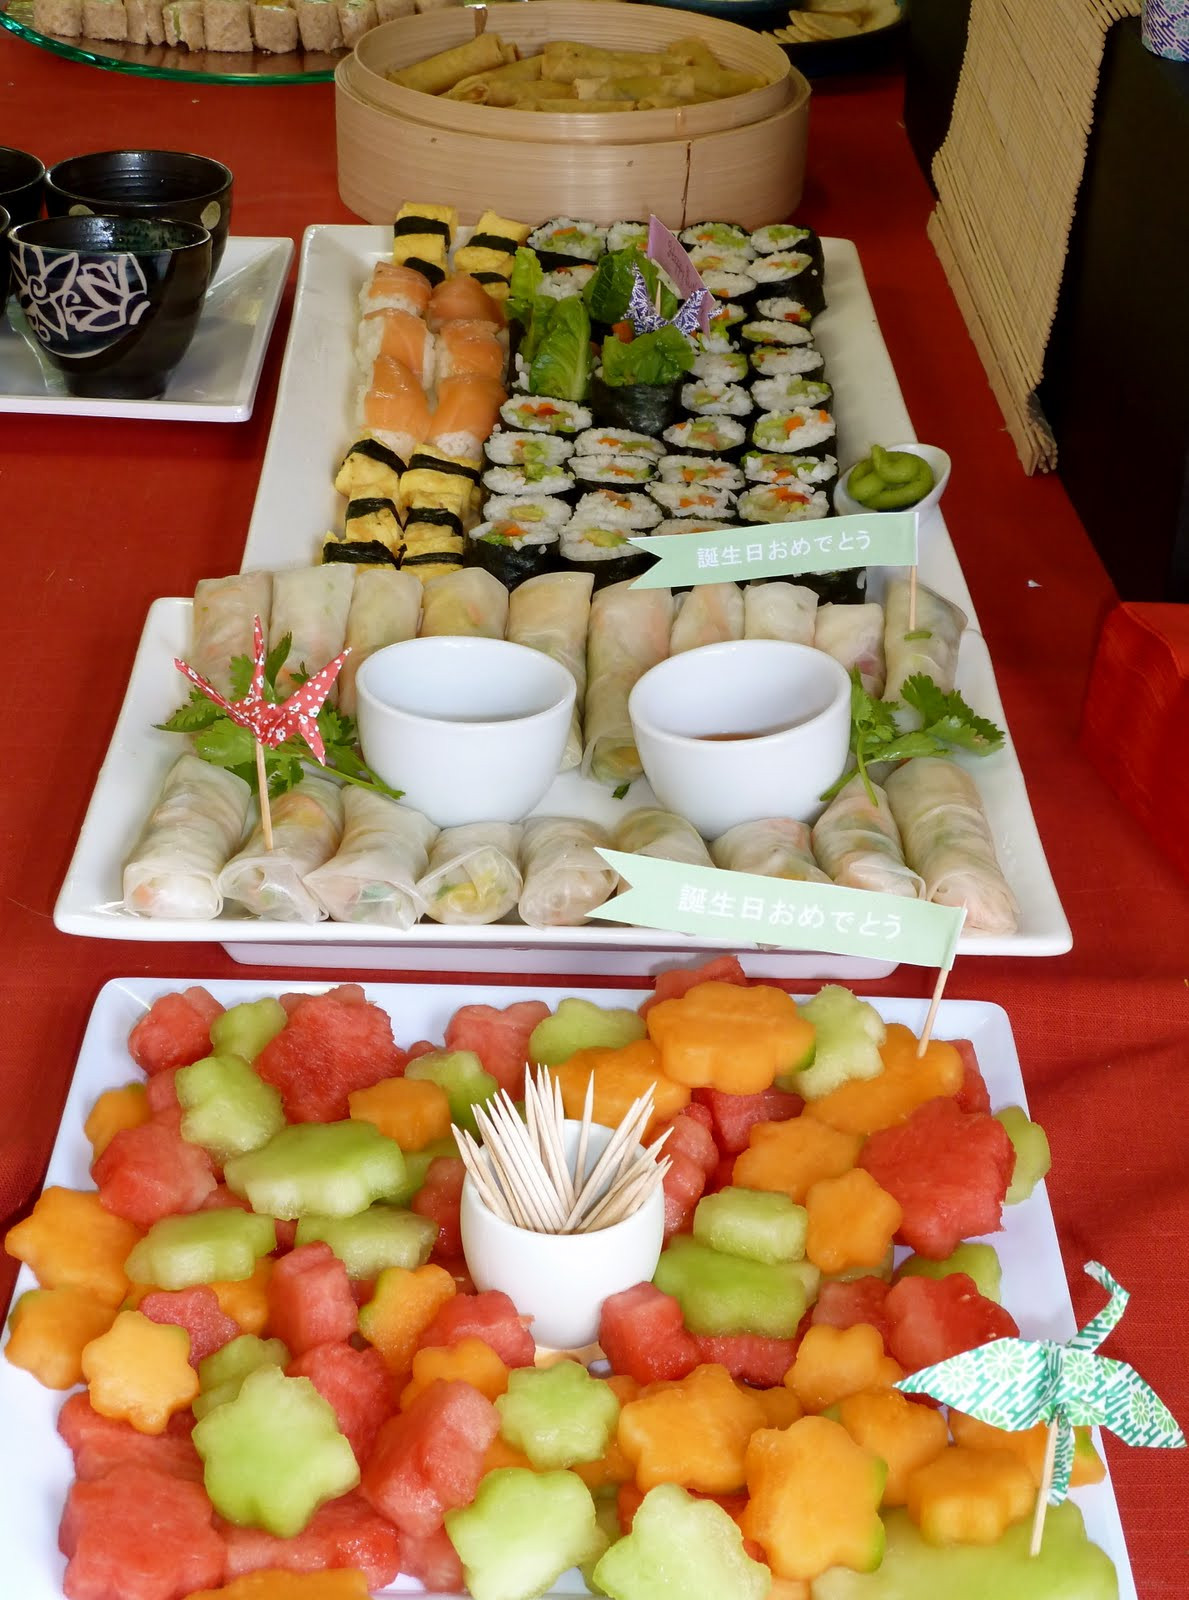 Food Ideas For A Party
 Planning a Baby Shower Food Theme Sushi for a Japanese Theme